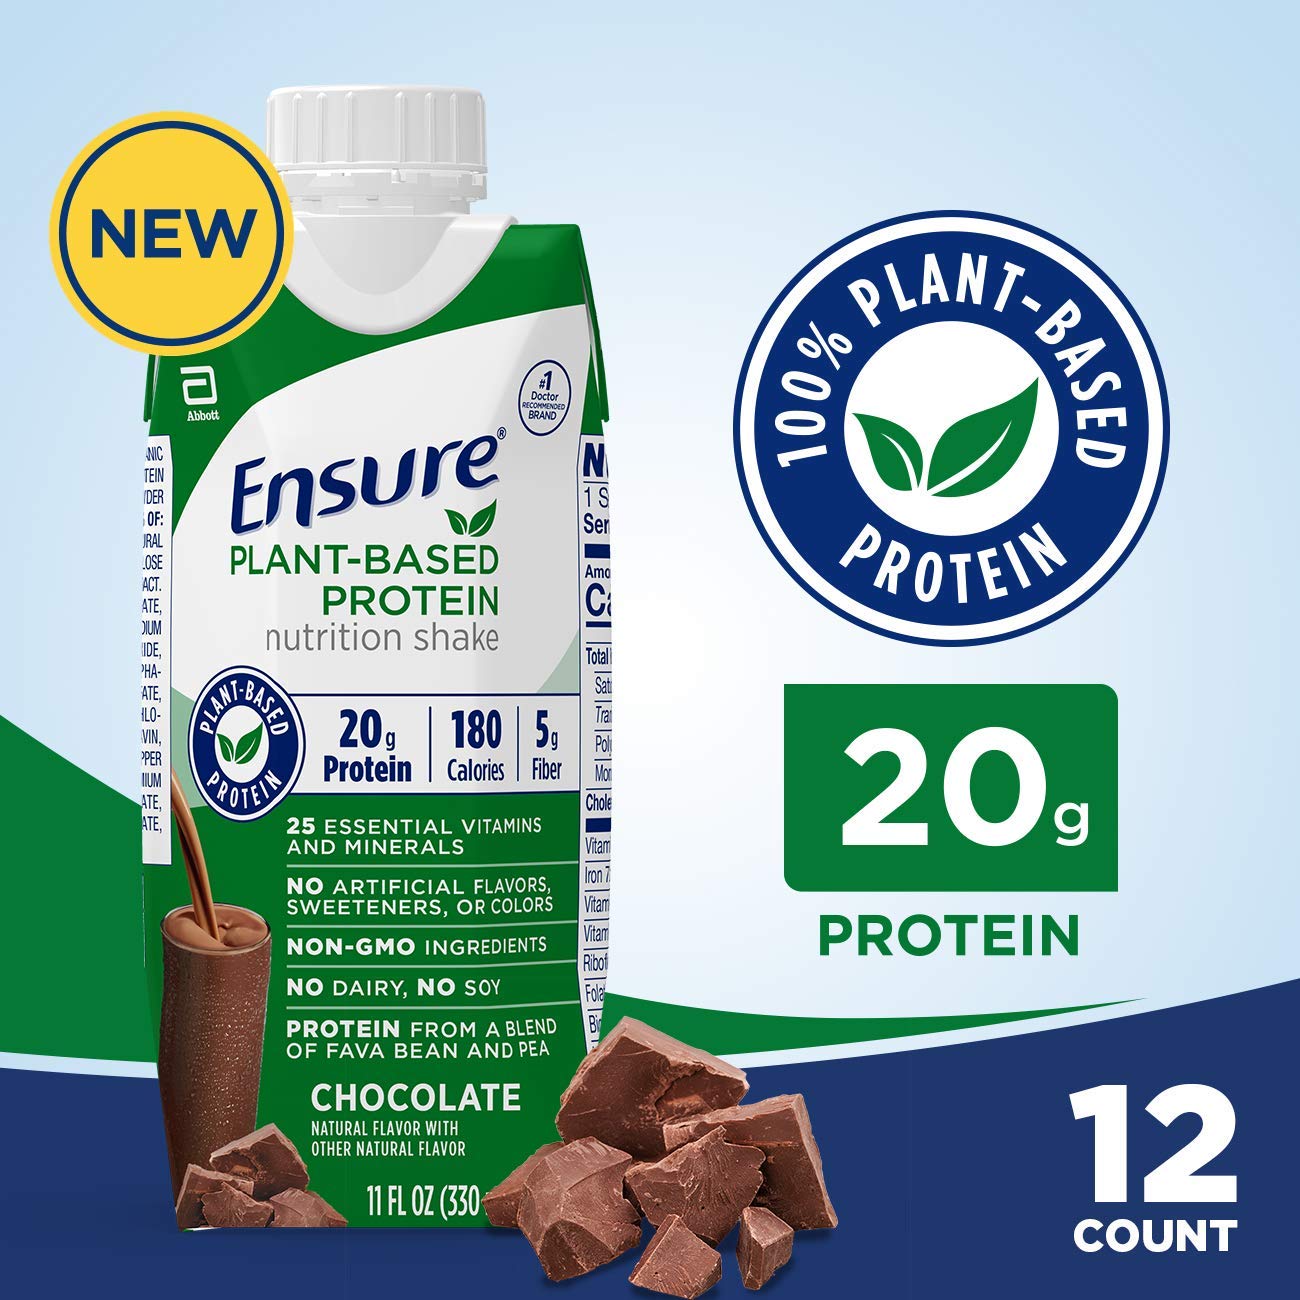 You are currently viewing Ensure Plant-Based Protein: Chocolate Nutrition Shake